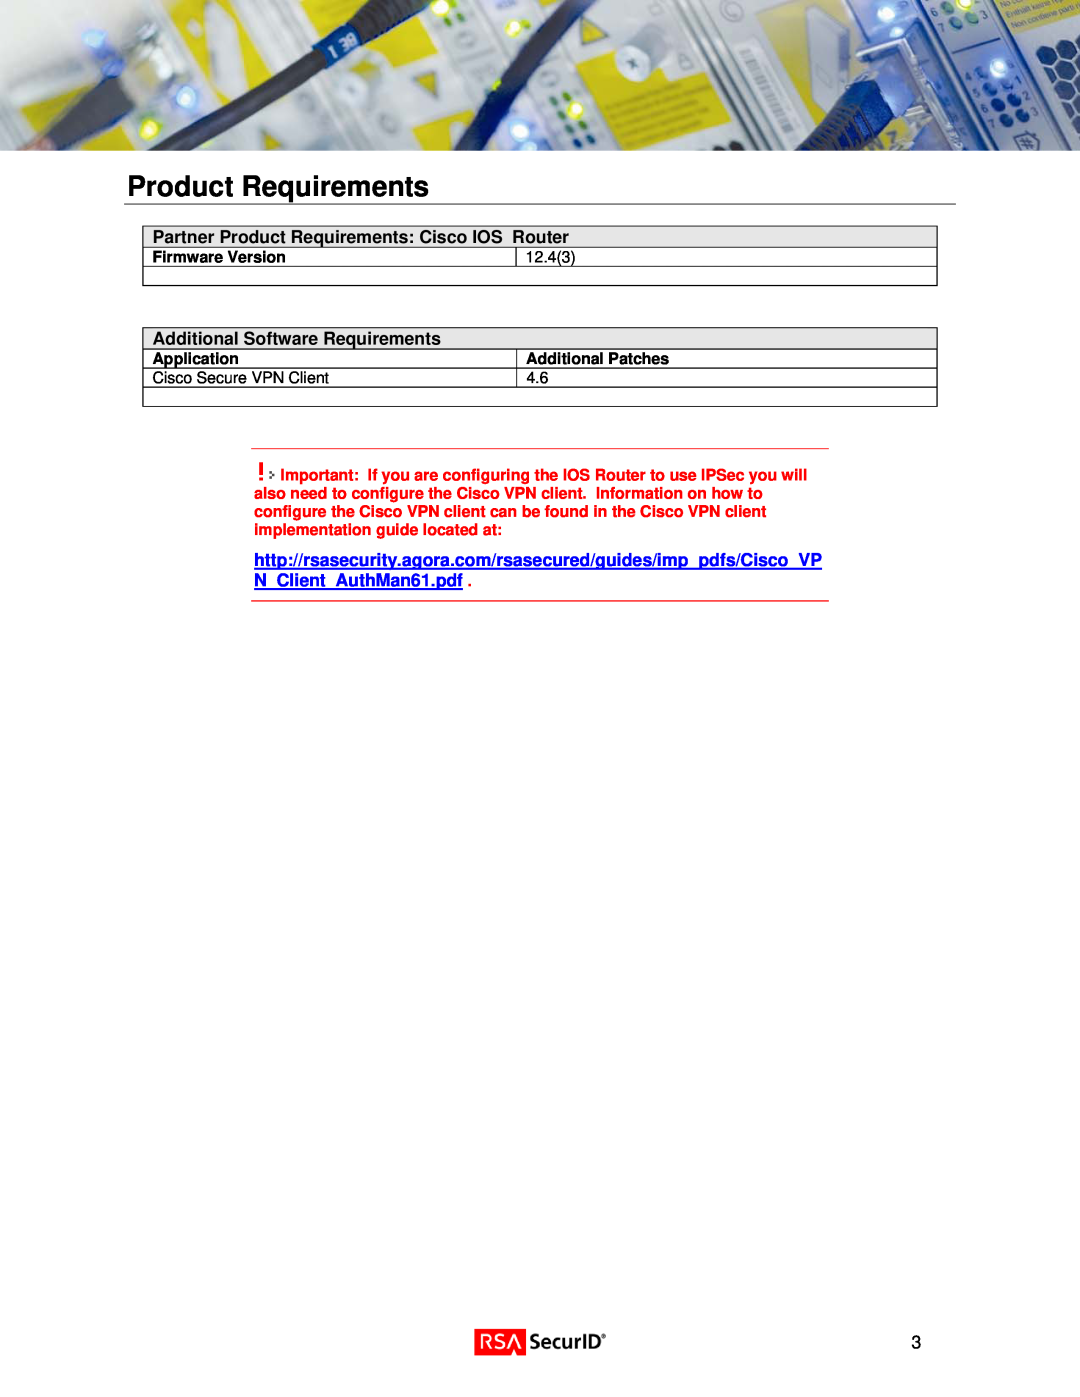 Cisco Systems IOS Router manual Product Requirements, Firmware Version, Application, Additional Patches 